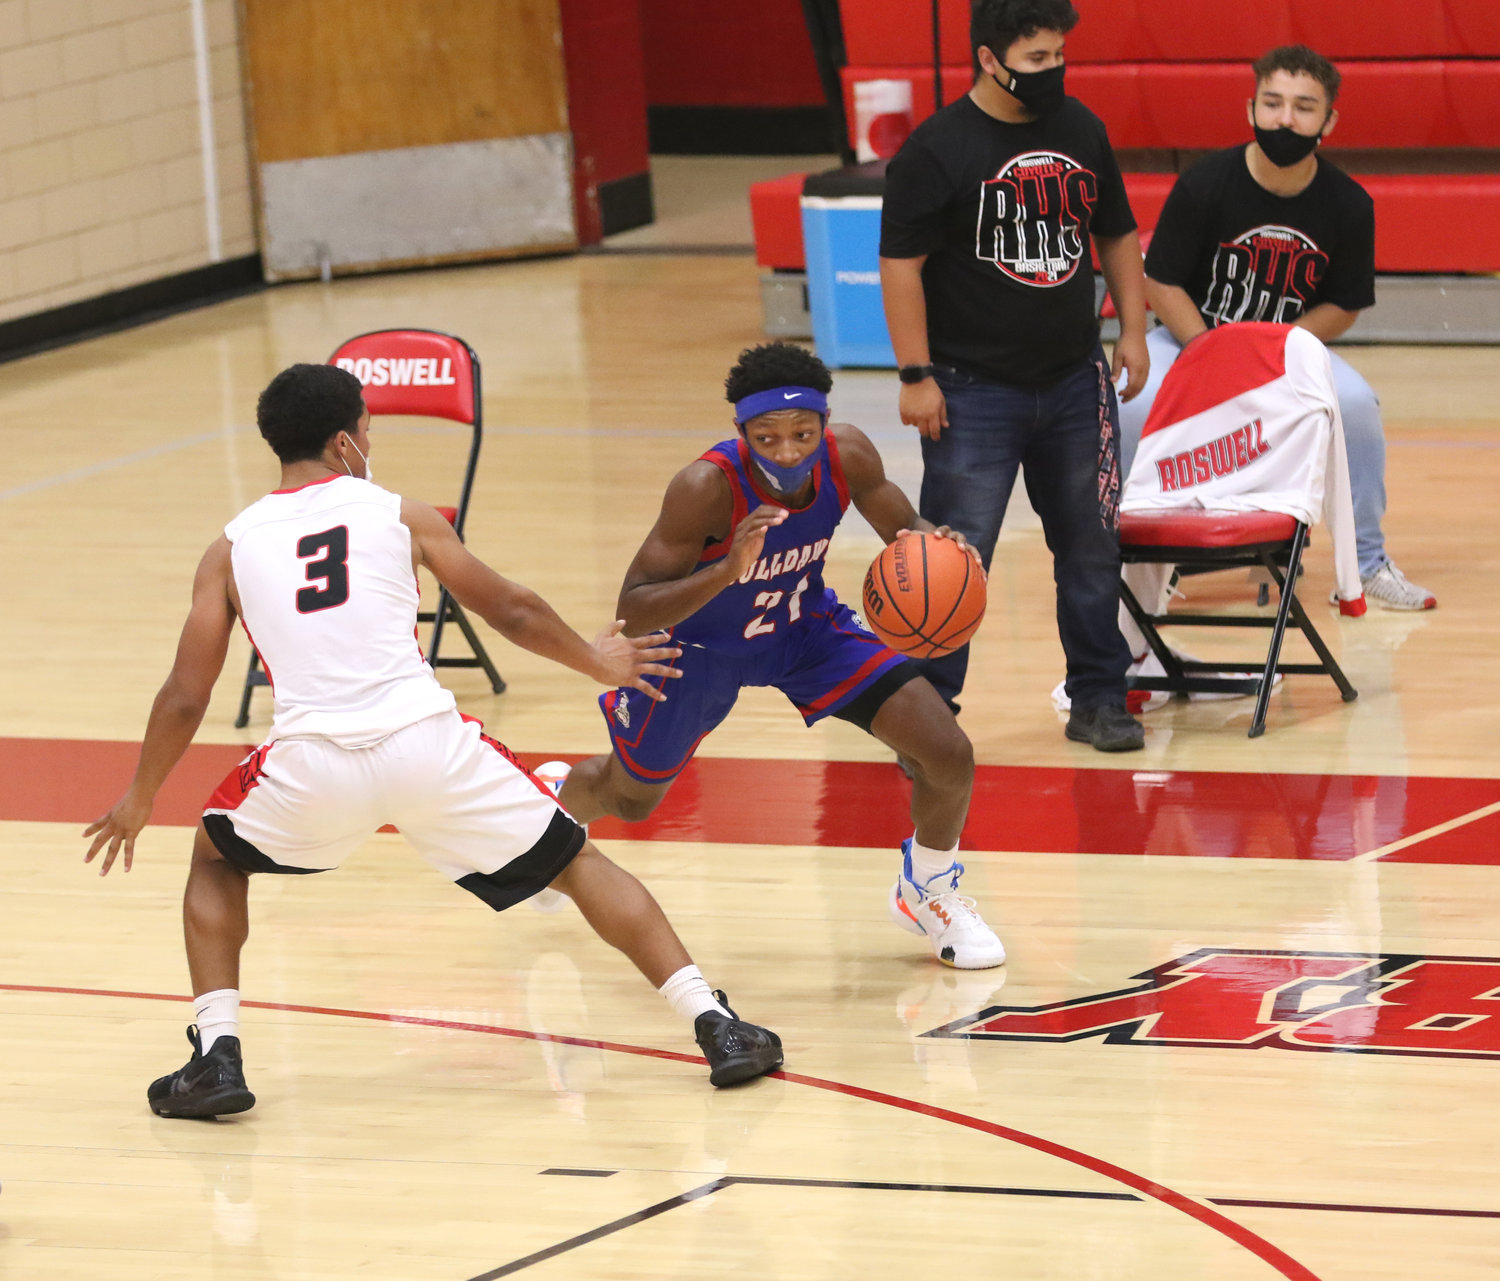 Las Cruces guard William "Deuce" Benjamin makes a move on Roswell defender Talon Sanders early in the first quarter of Thursday night's semifinal contest at the Coyote Den in Roswell.